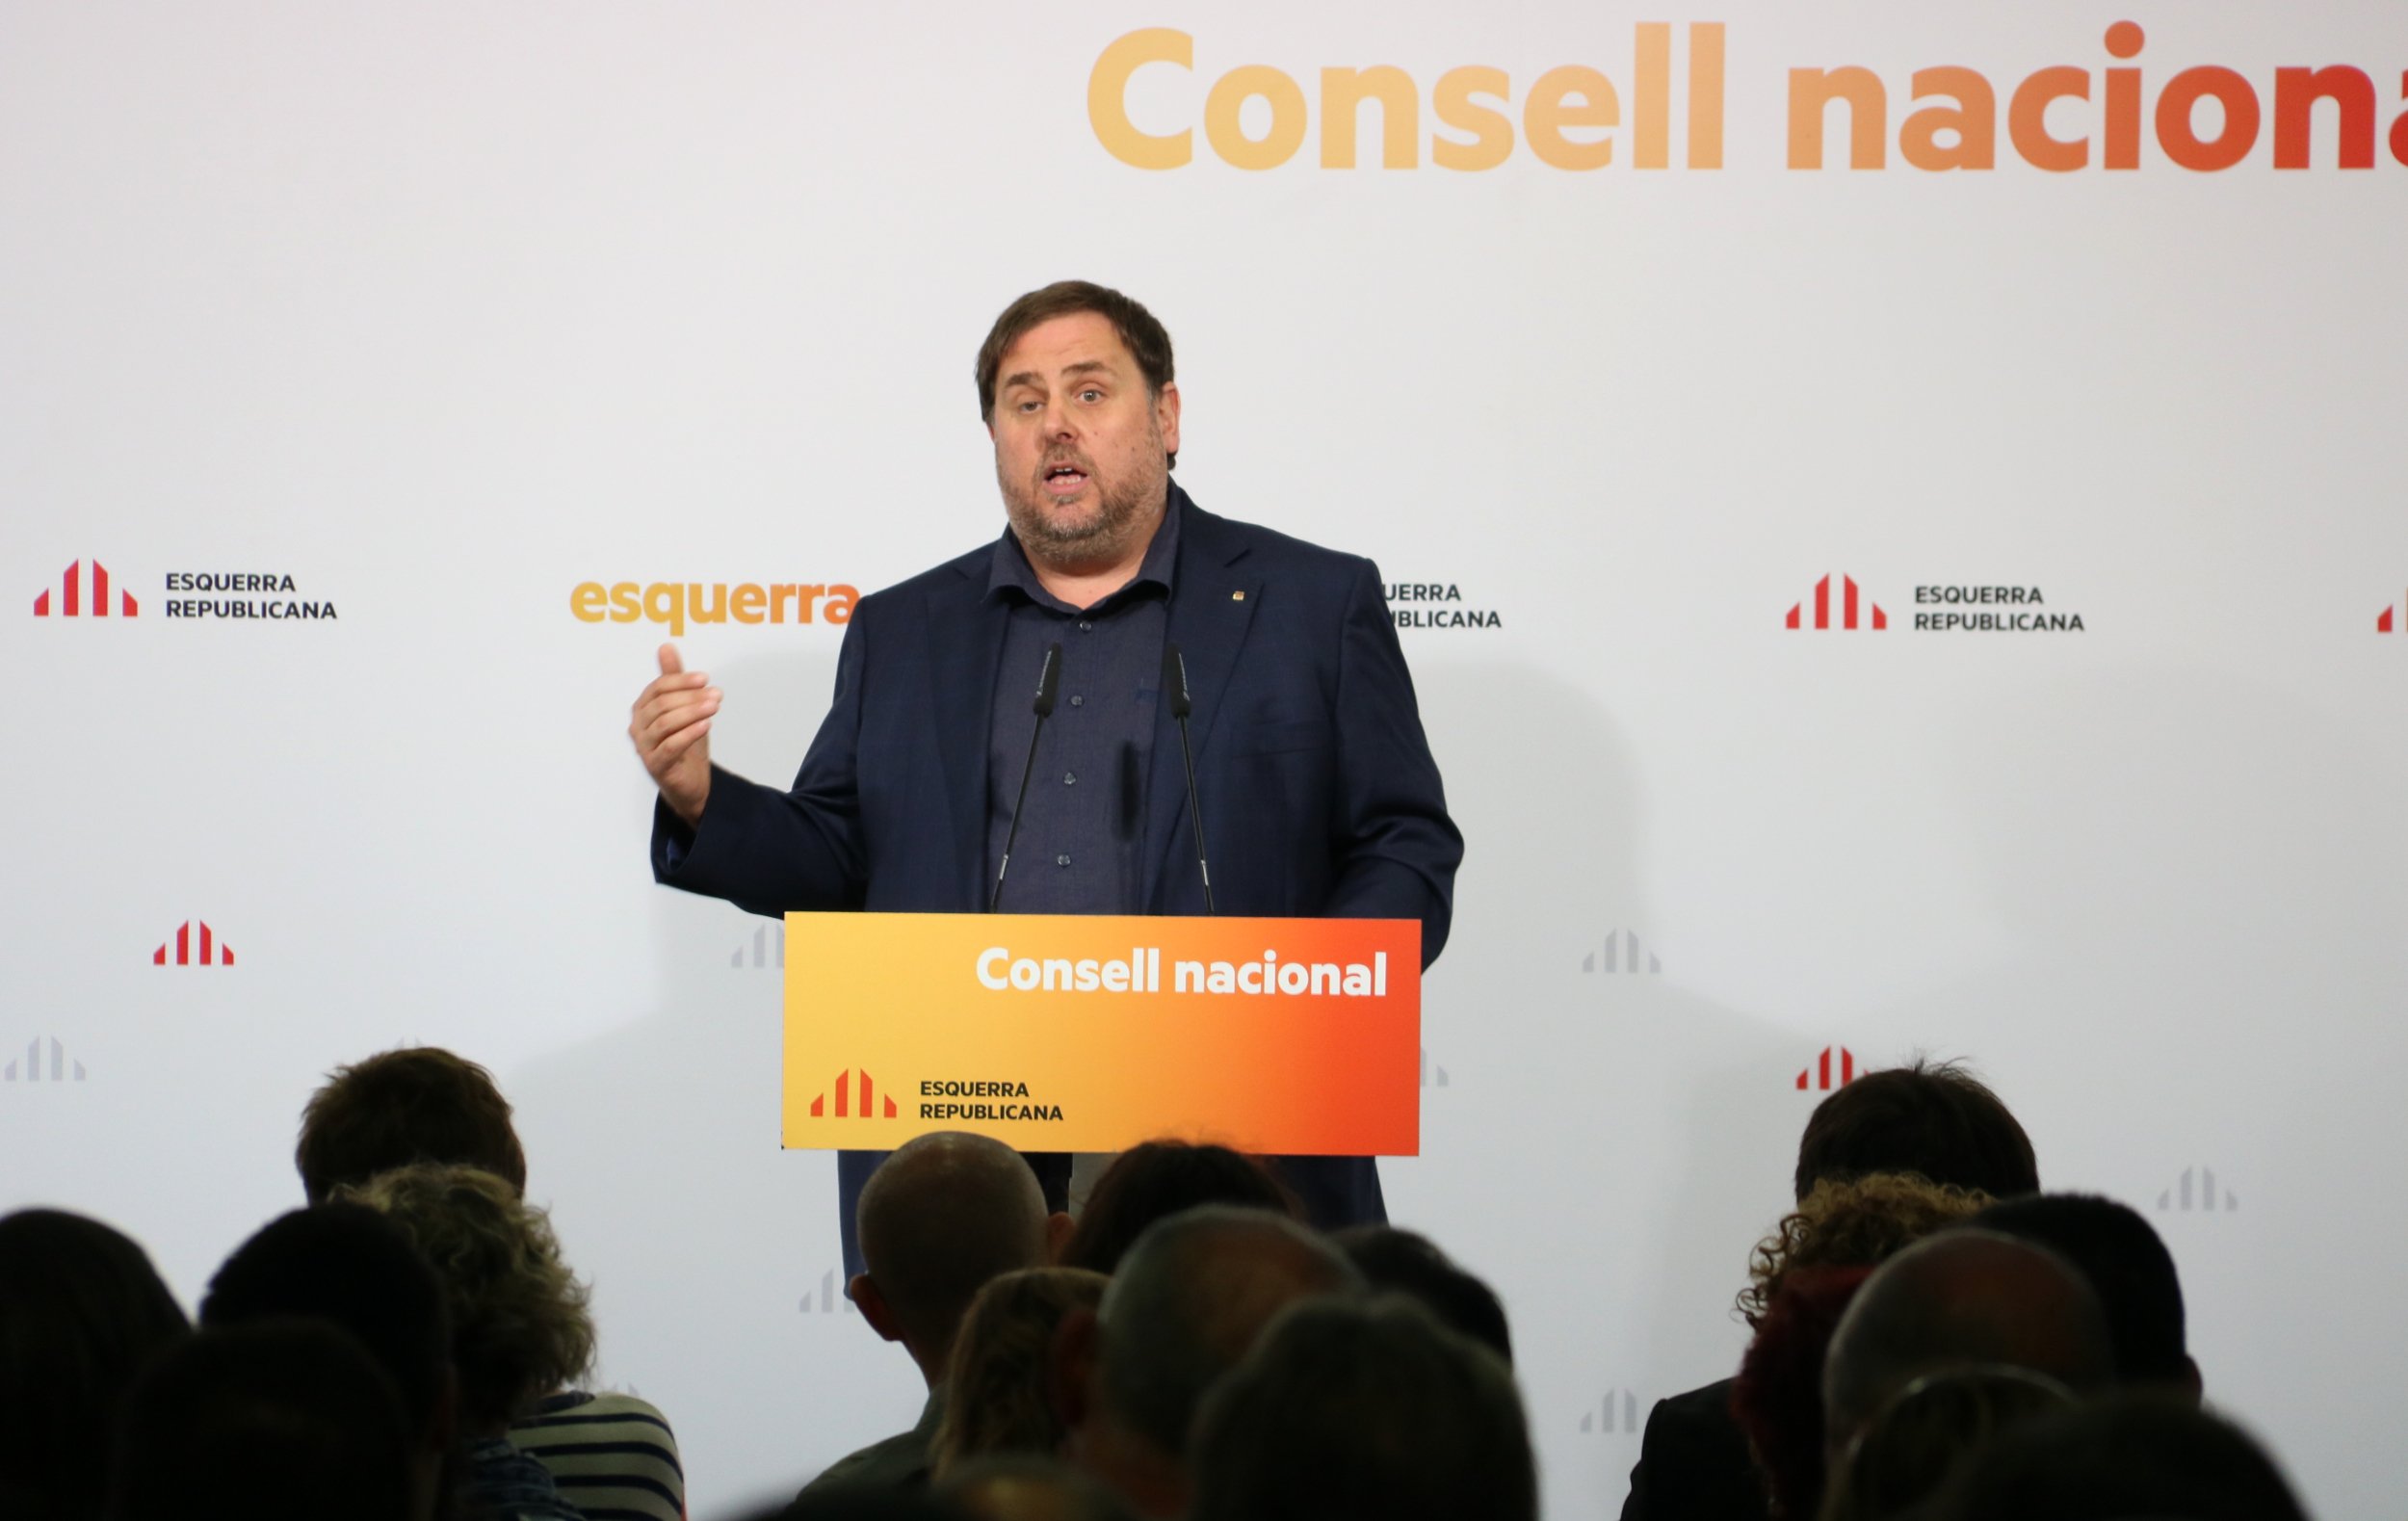 Catalonia's Junqueras: "absolute commitment" to applying referendum mandate